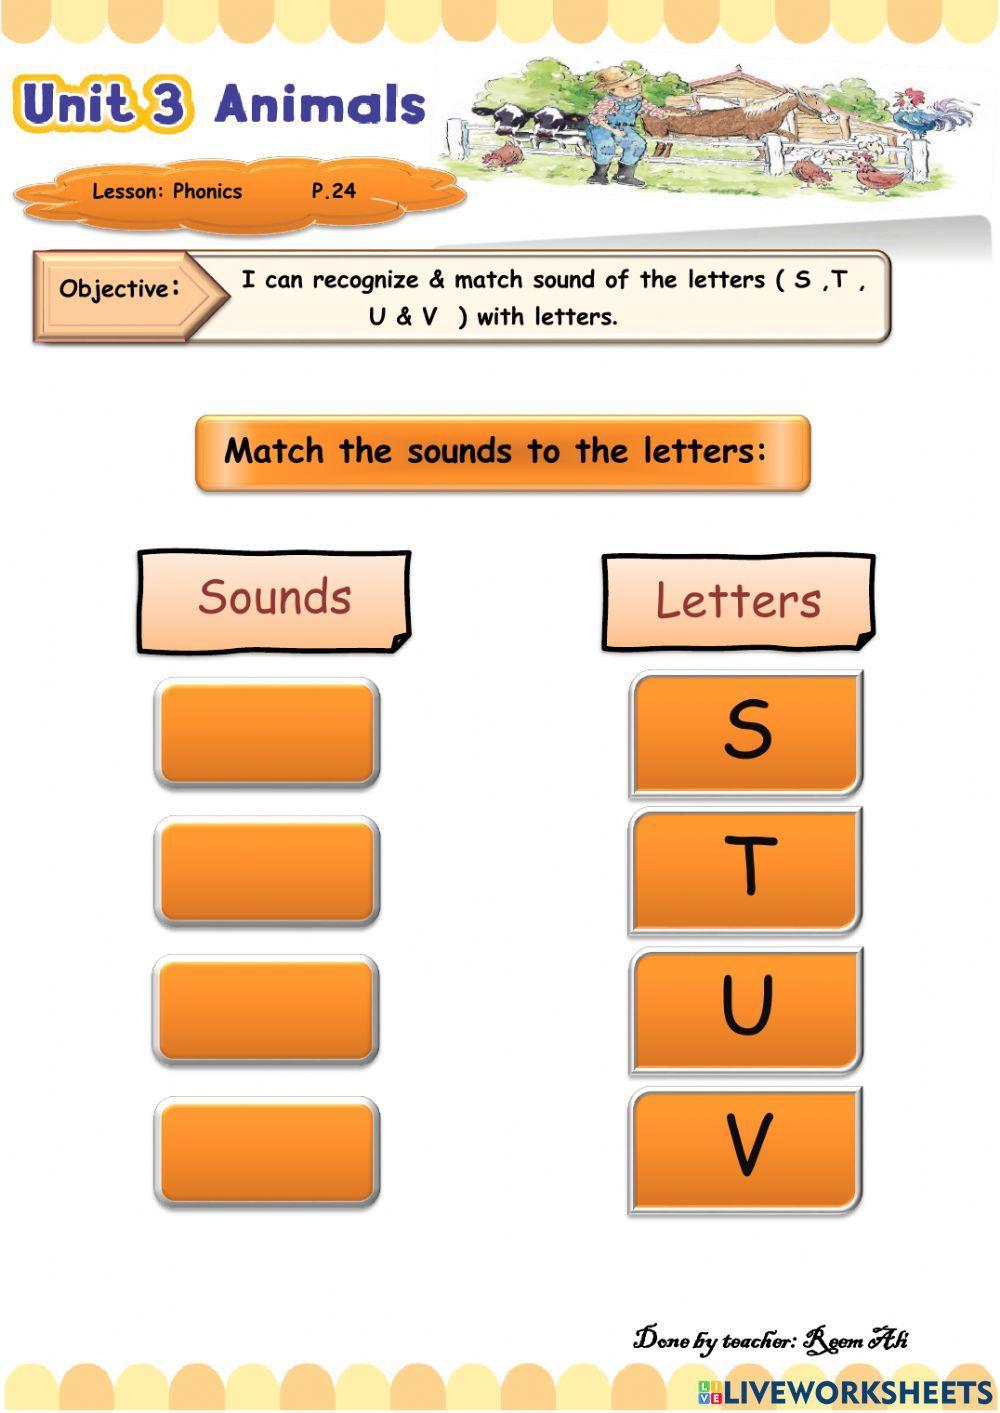 We Can2 U3 L4: I can make the sounds of the letters ( S , T , U , & V ).